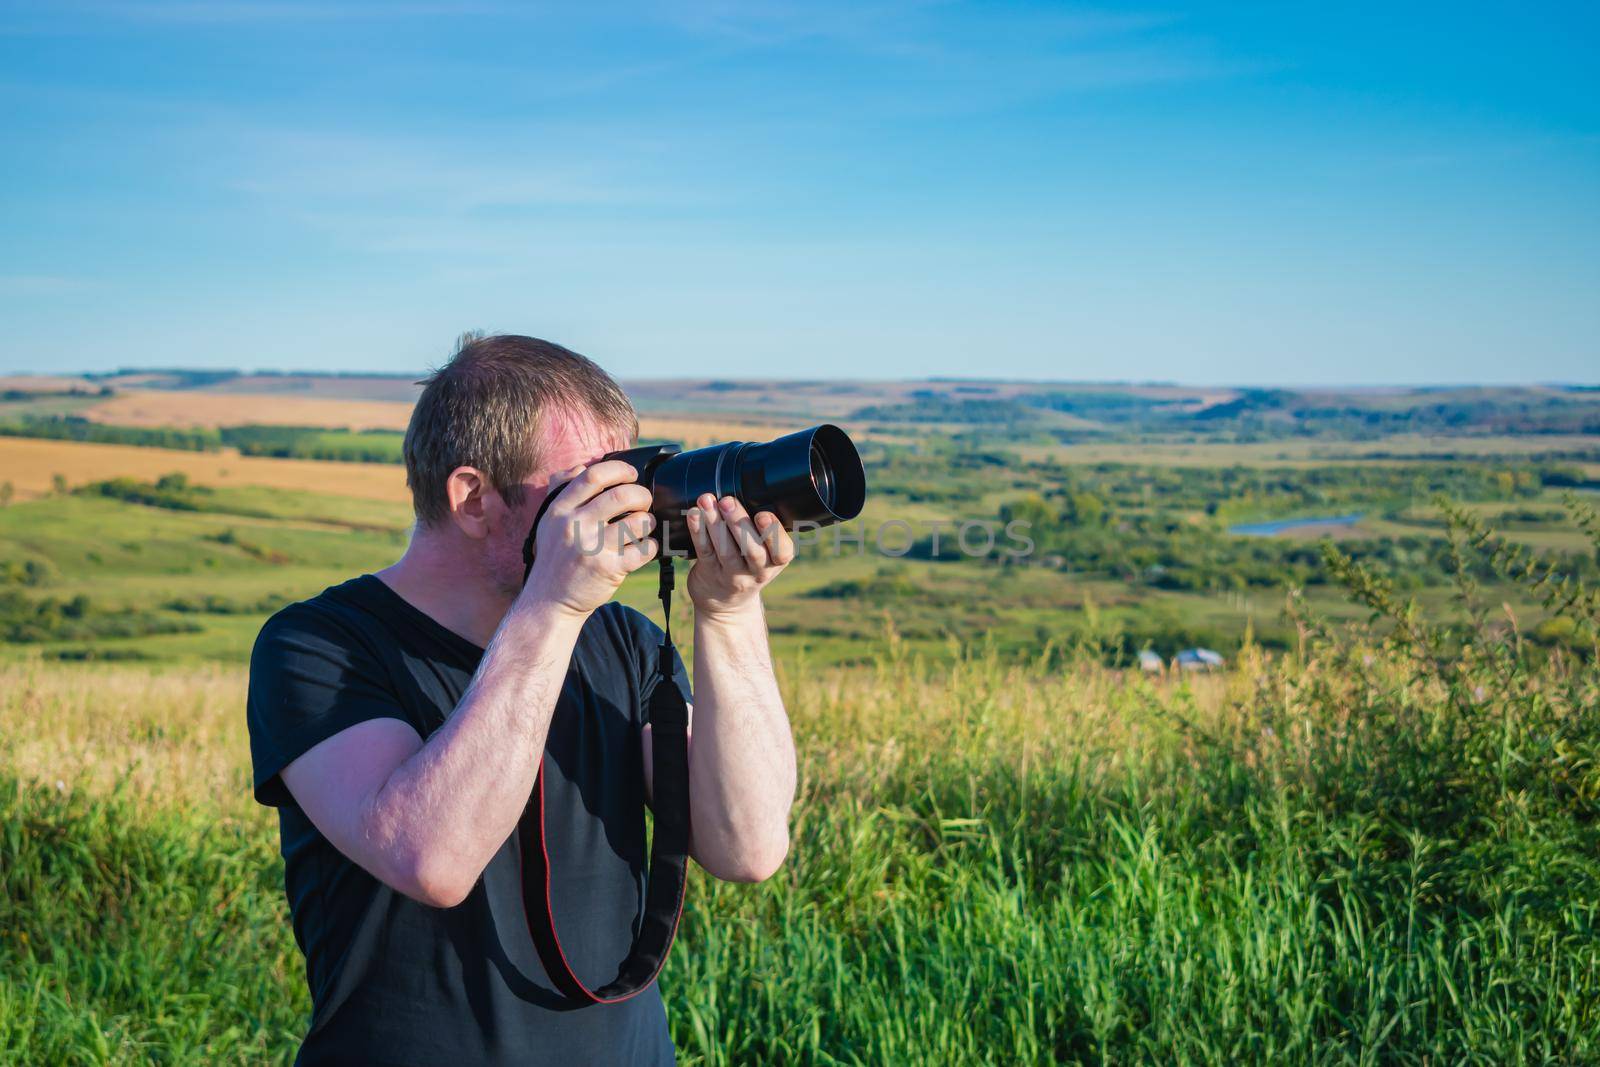 Photographer takes aim and takes pictures of nature outdoors by Skaron